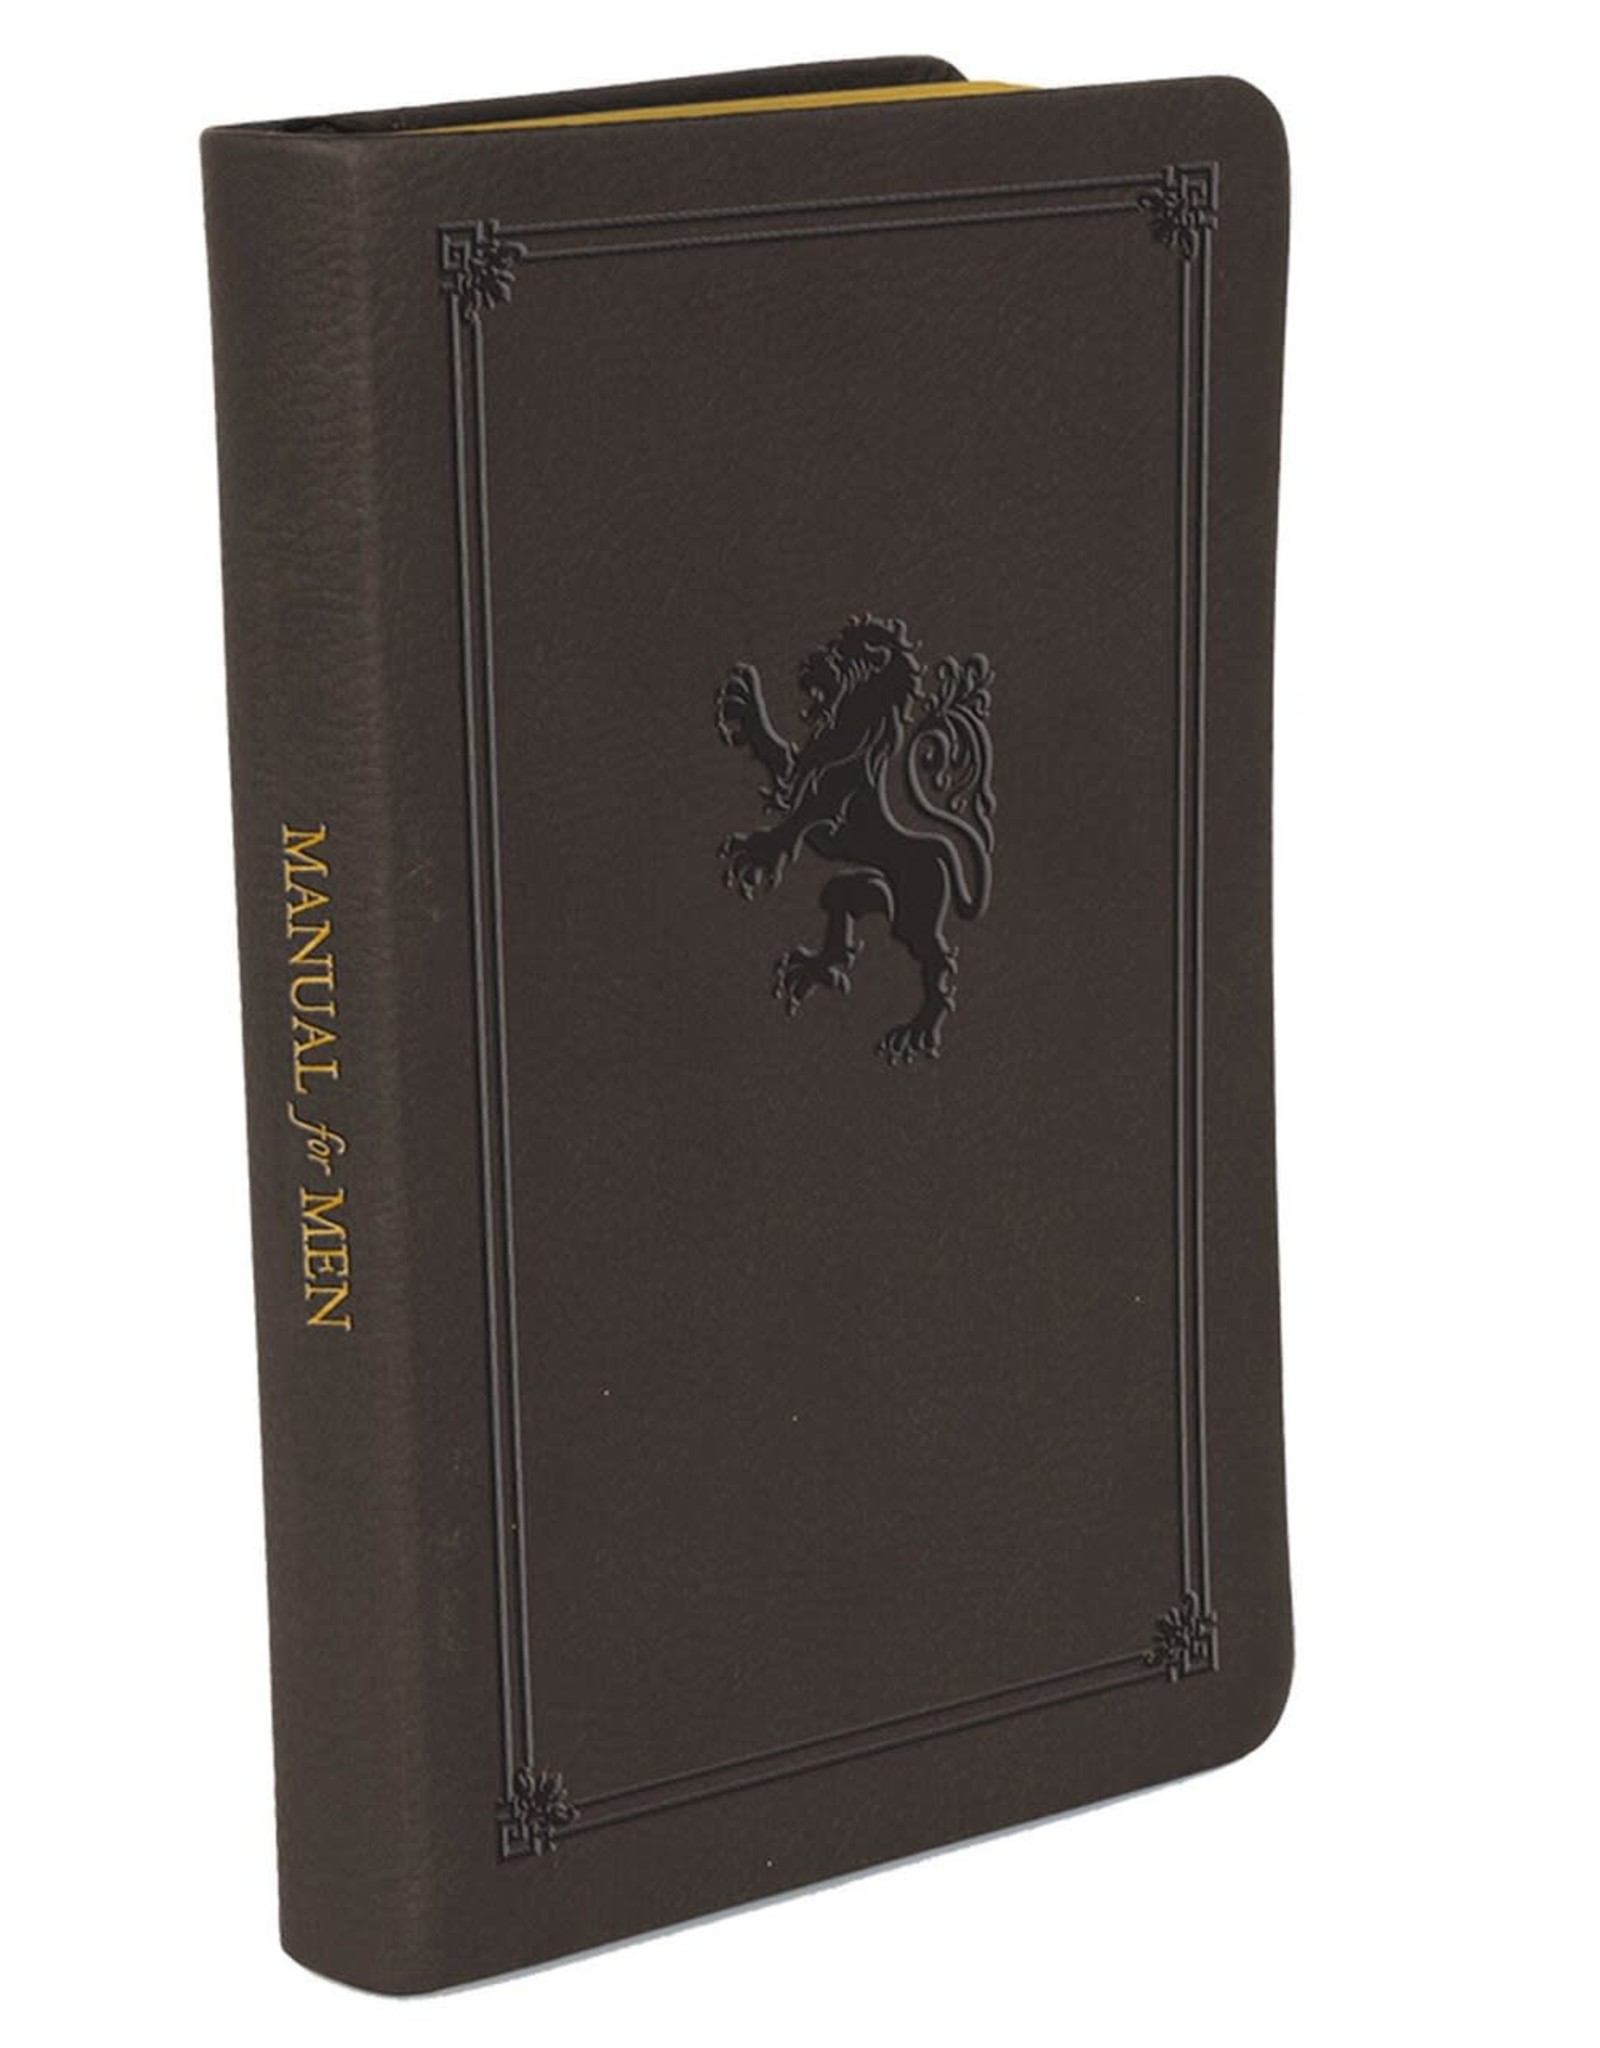 Tan Books Manual For Men by Most Reverend Thomas J. Olmsted (Ultrasoft Leatherette)